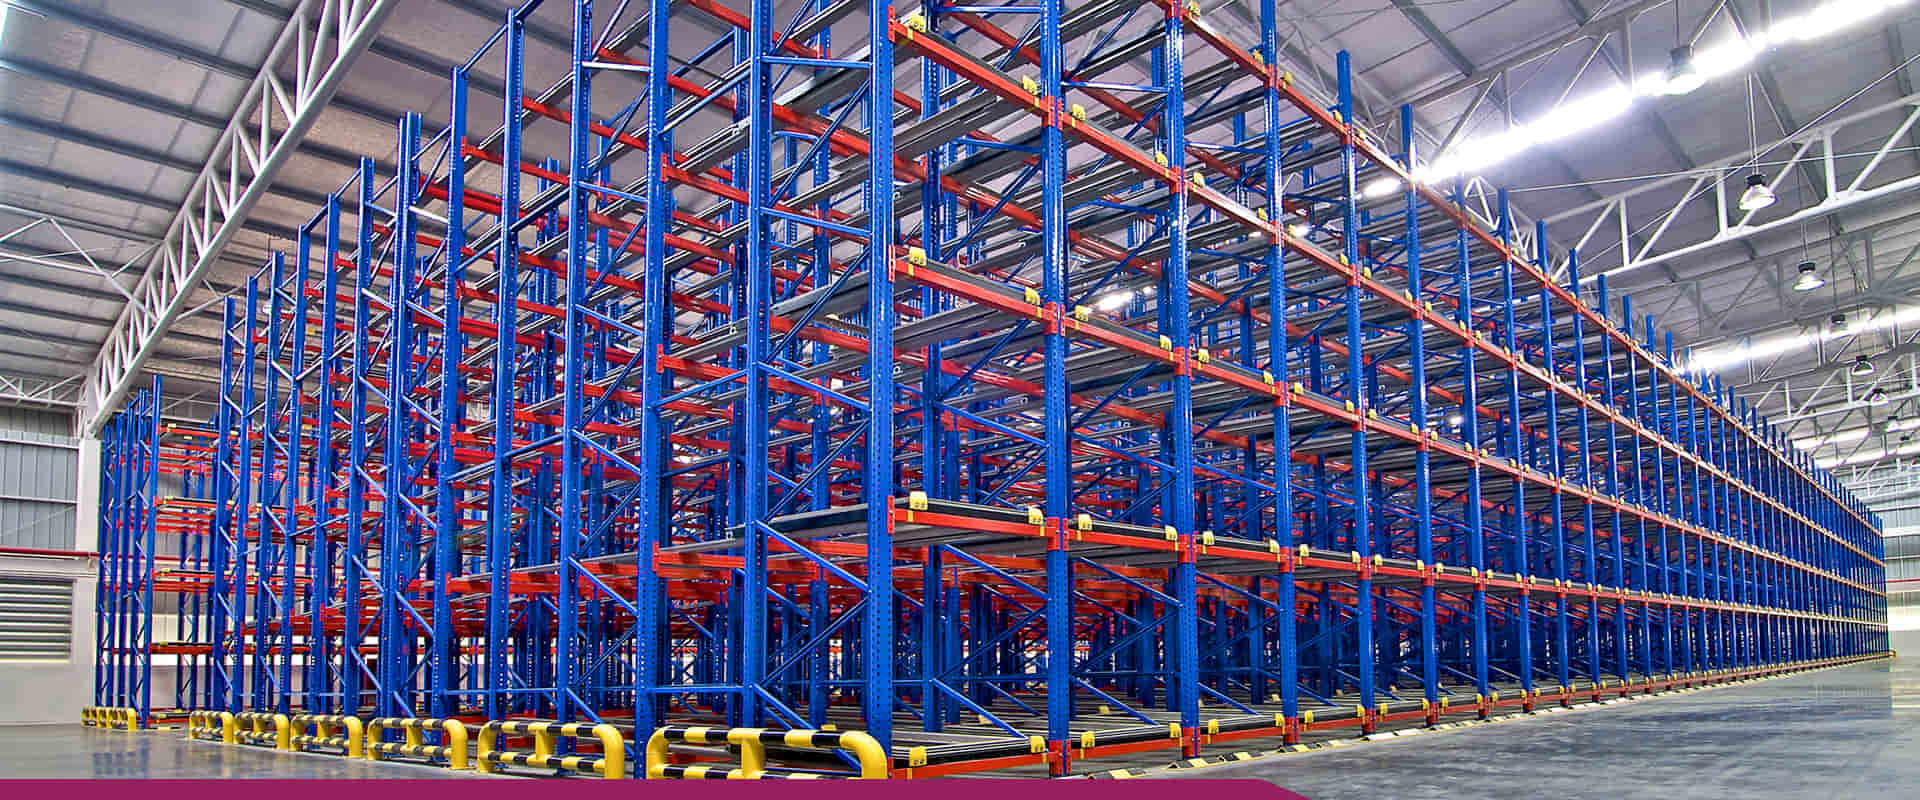 India’s Top Warehouse And Industrial Storage Racks Manufacturer In Nalagarh